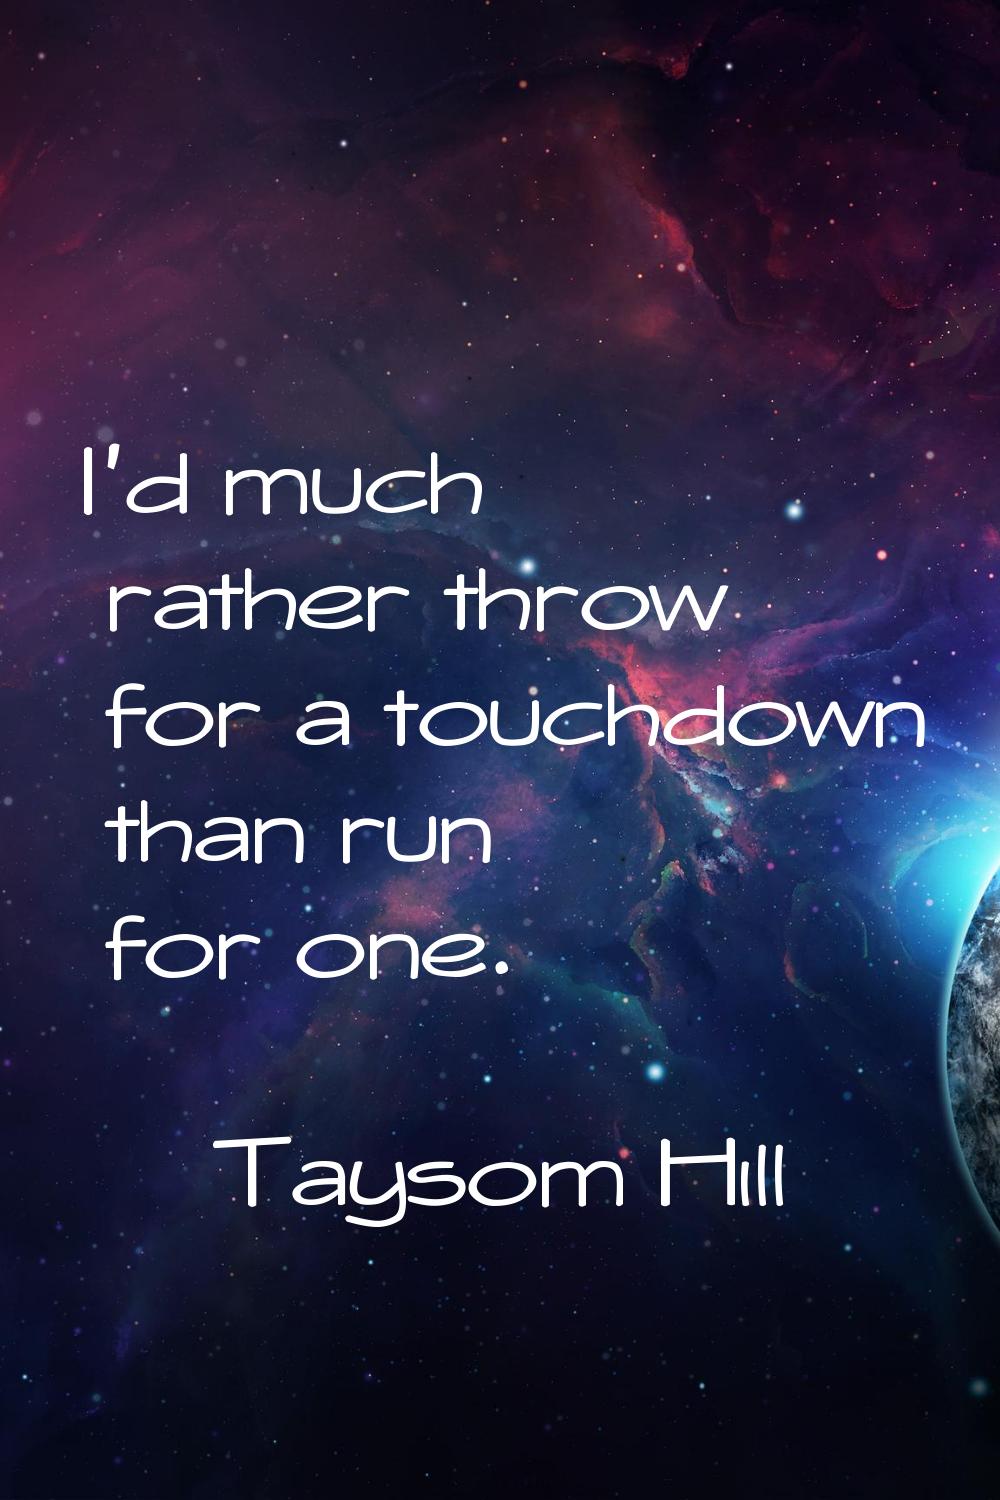 I'd much rather throw for a touchdown than run for one.